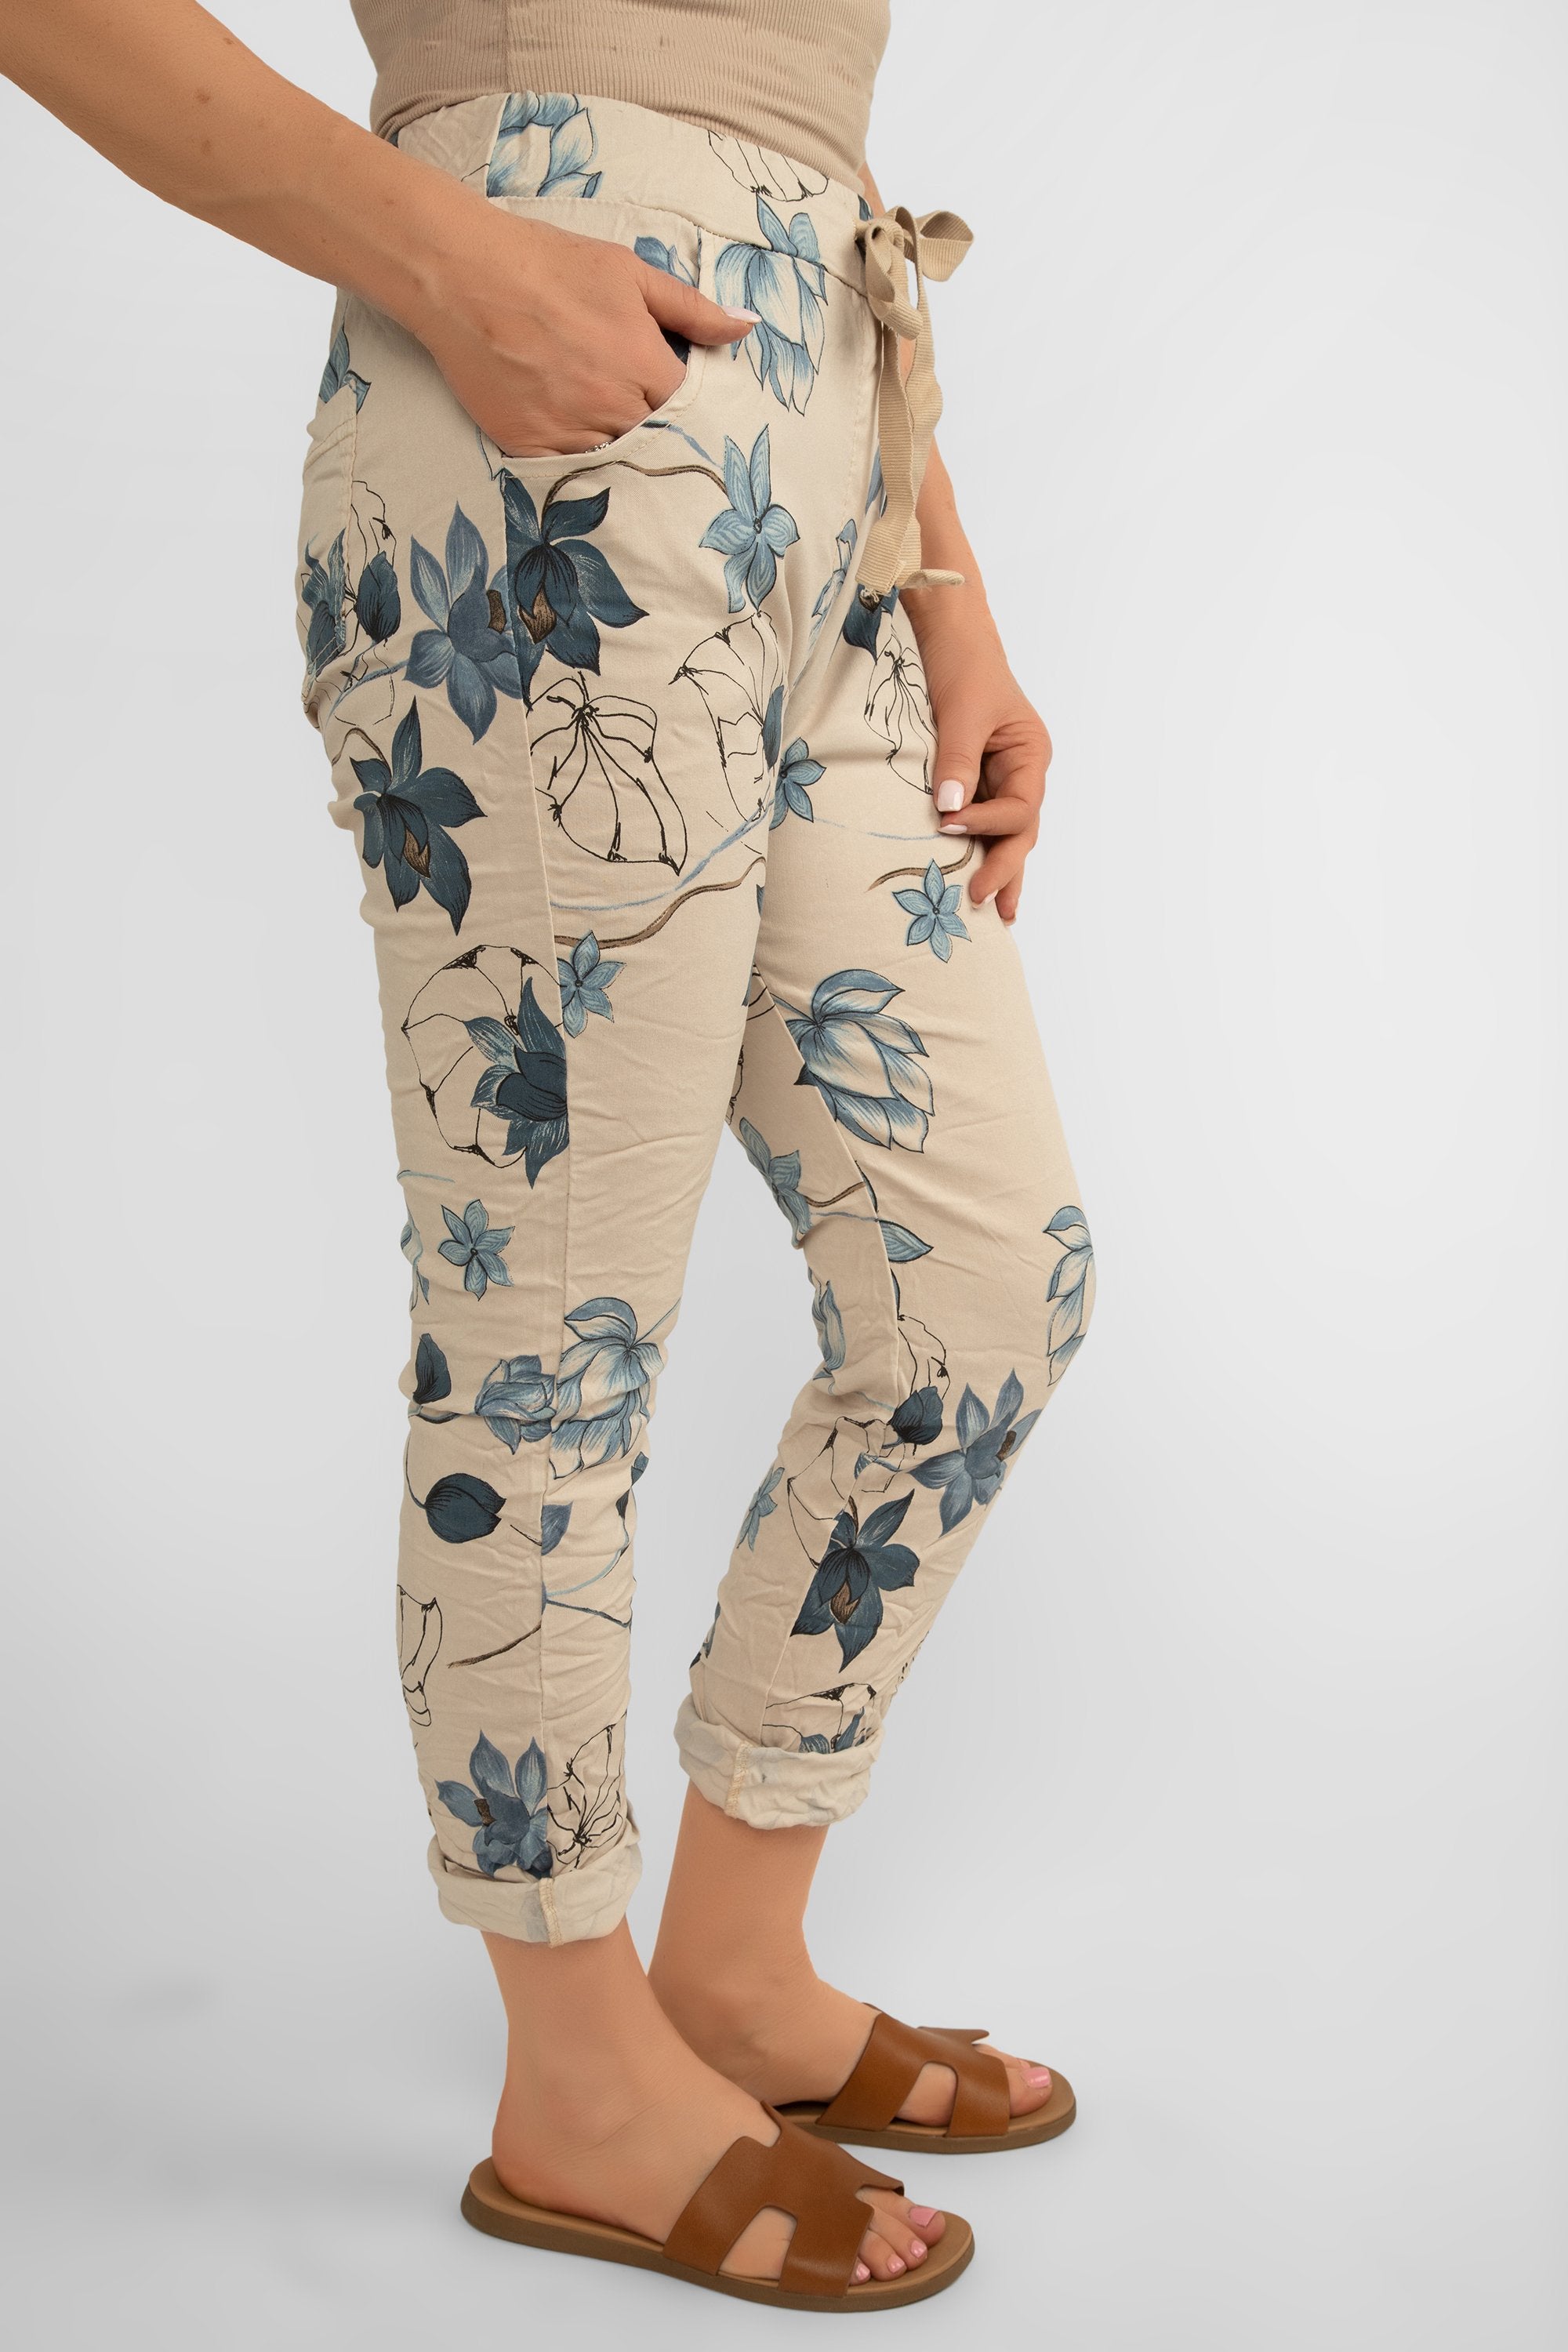 Bella Amore (21036) Women's Pull On Crinkle Pants with Side Pockets, Rolled Hem, and Blue Lotus Flower Print in Beige